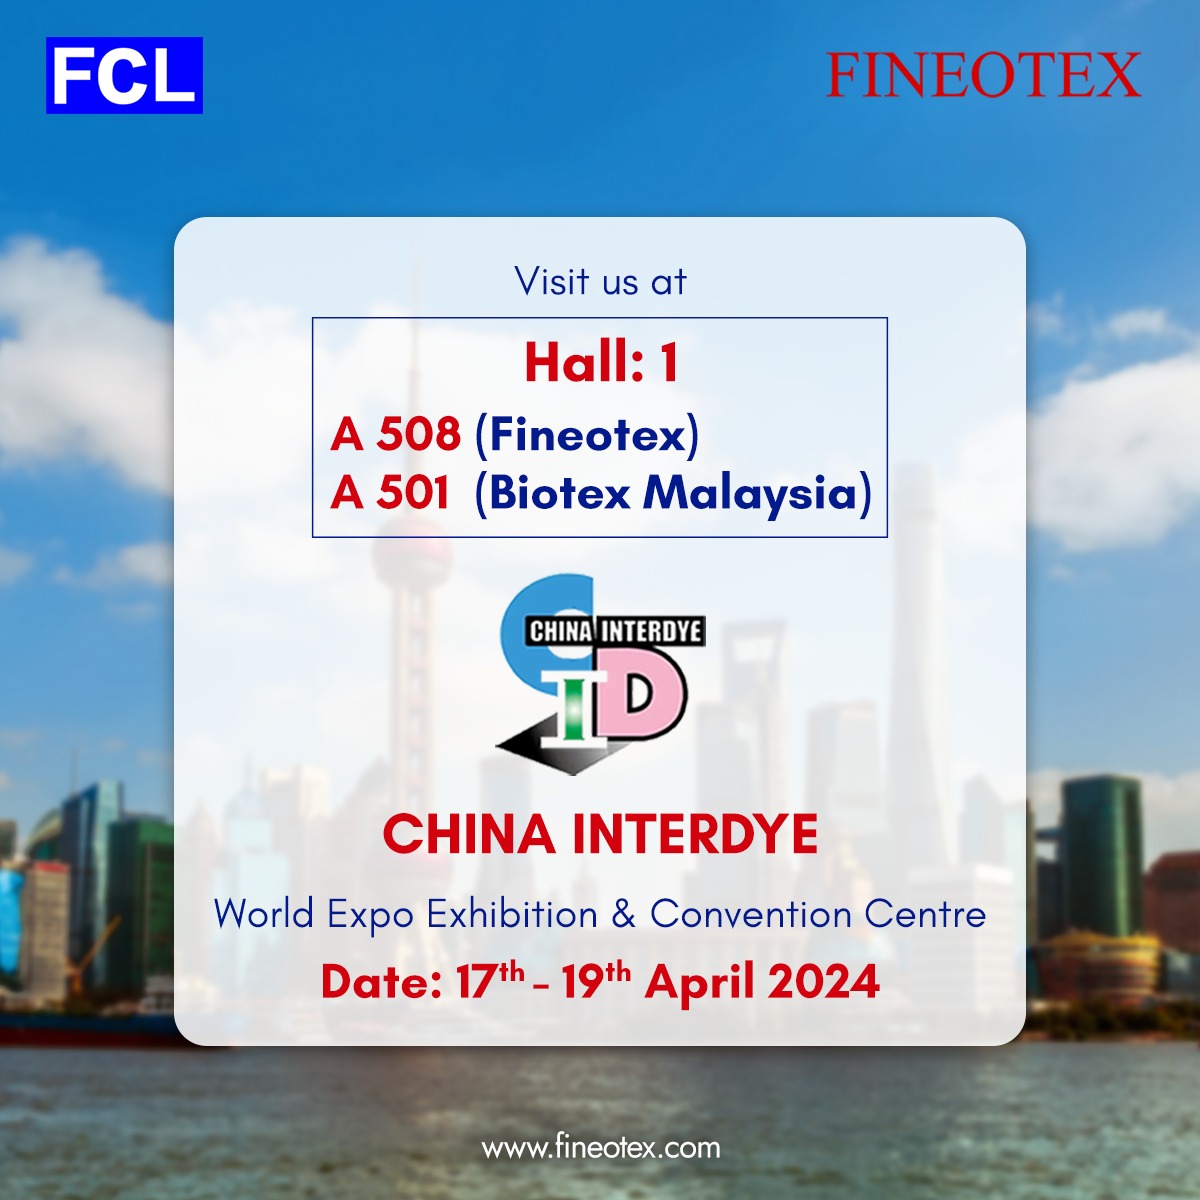 Fineotex welcomes you all at China Interdye, SWEECC, Shanghai, 17th-19th April 24